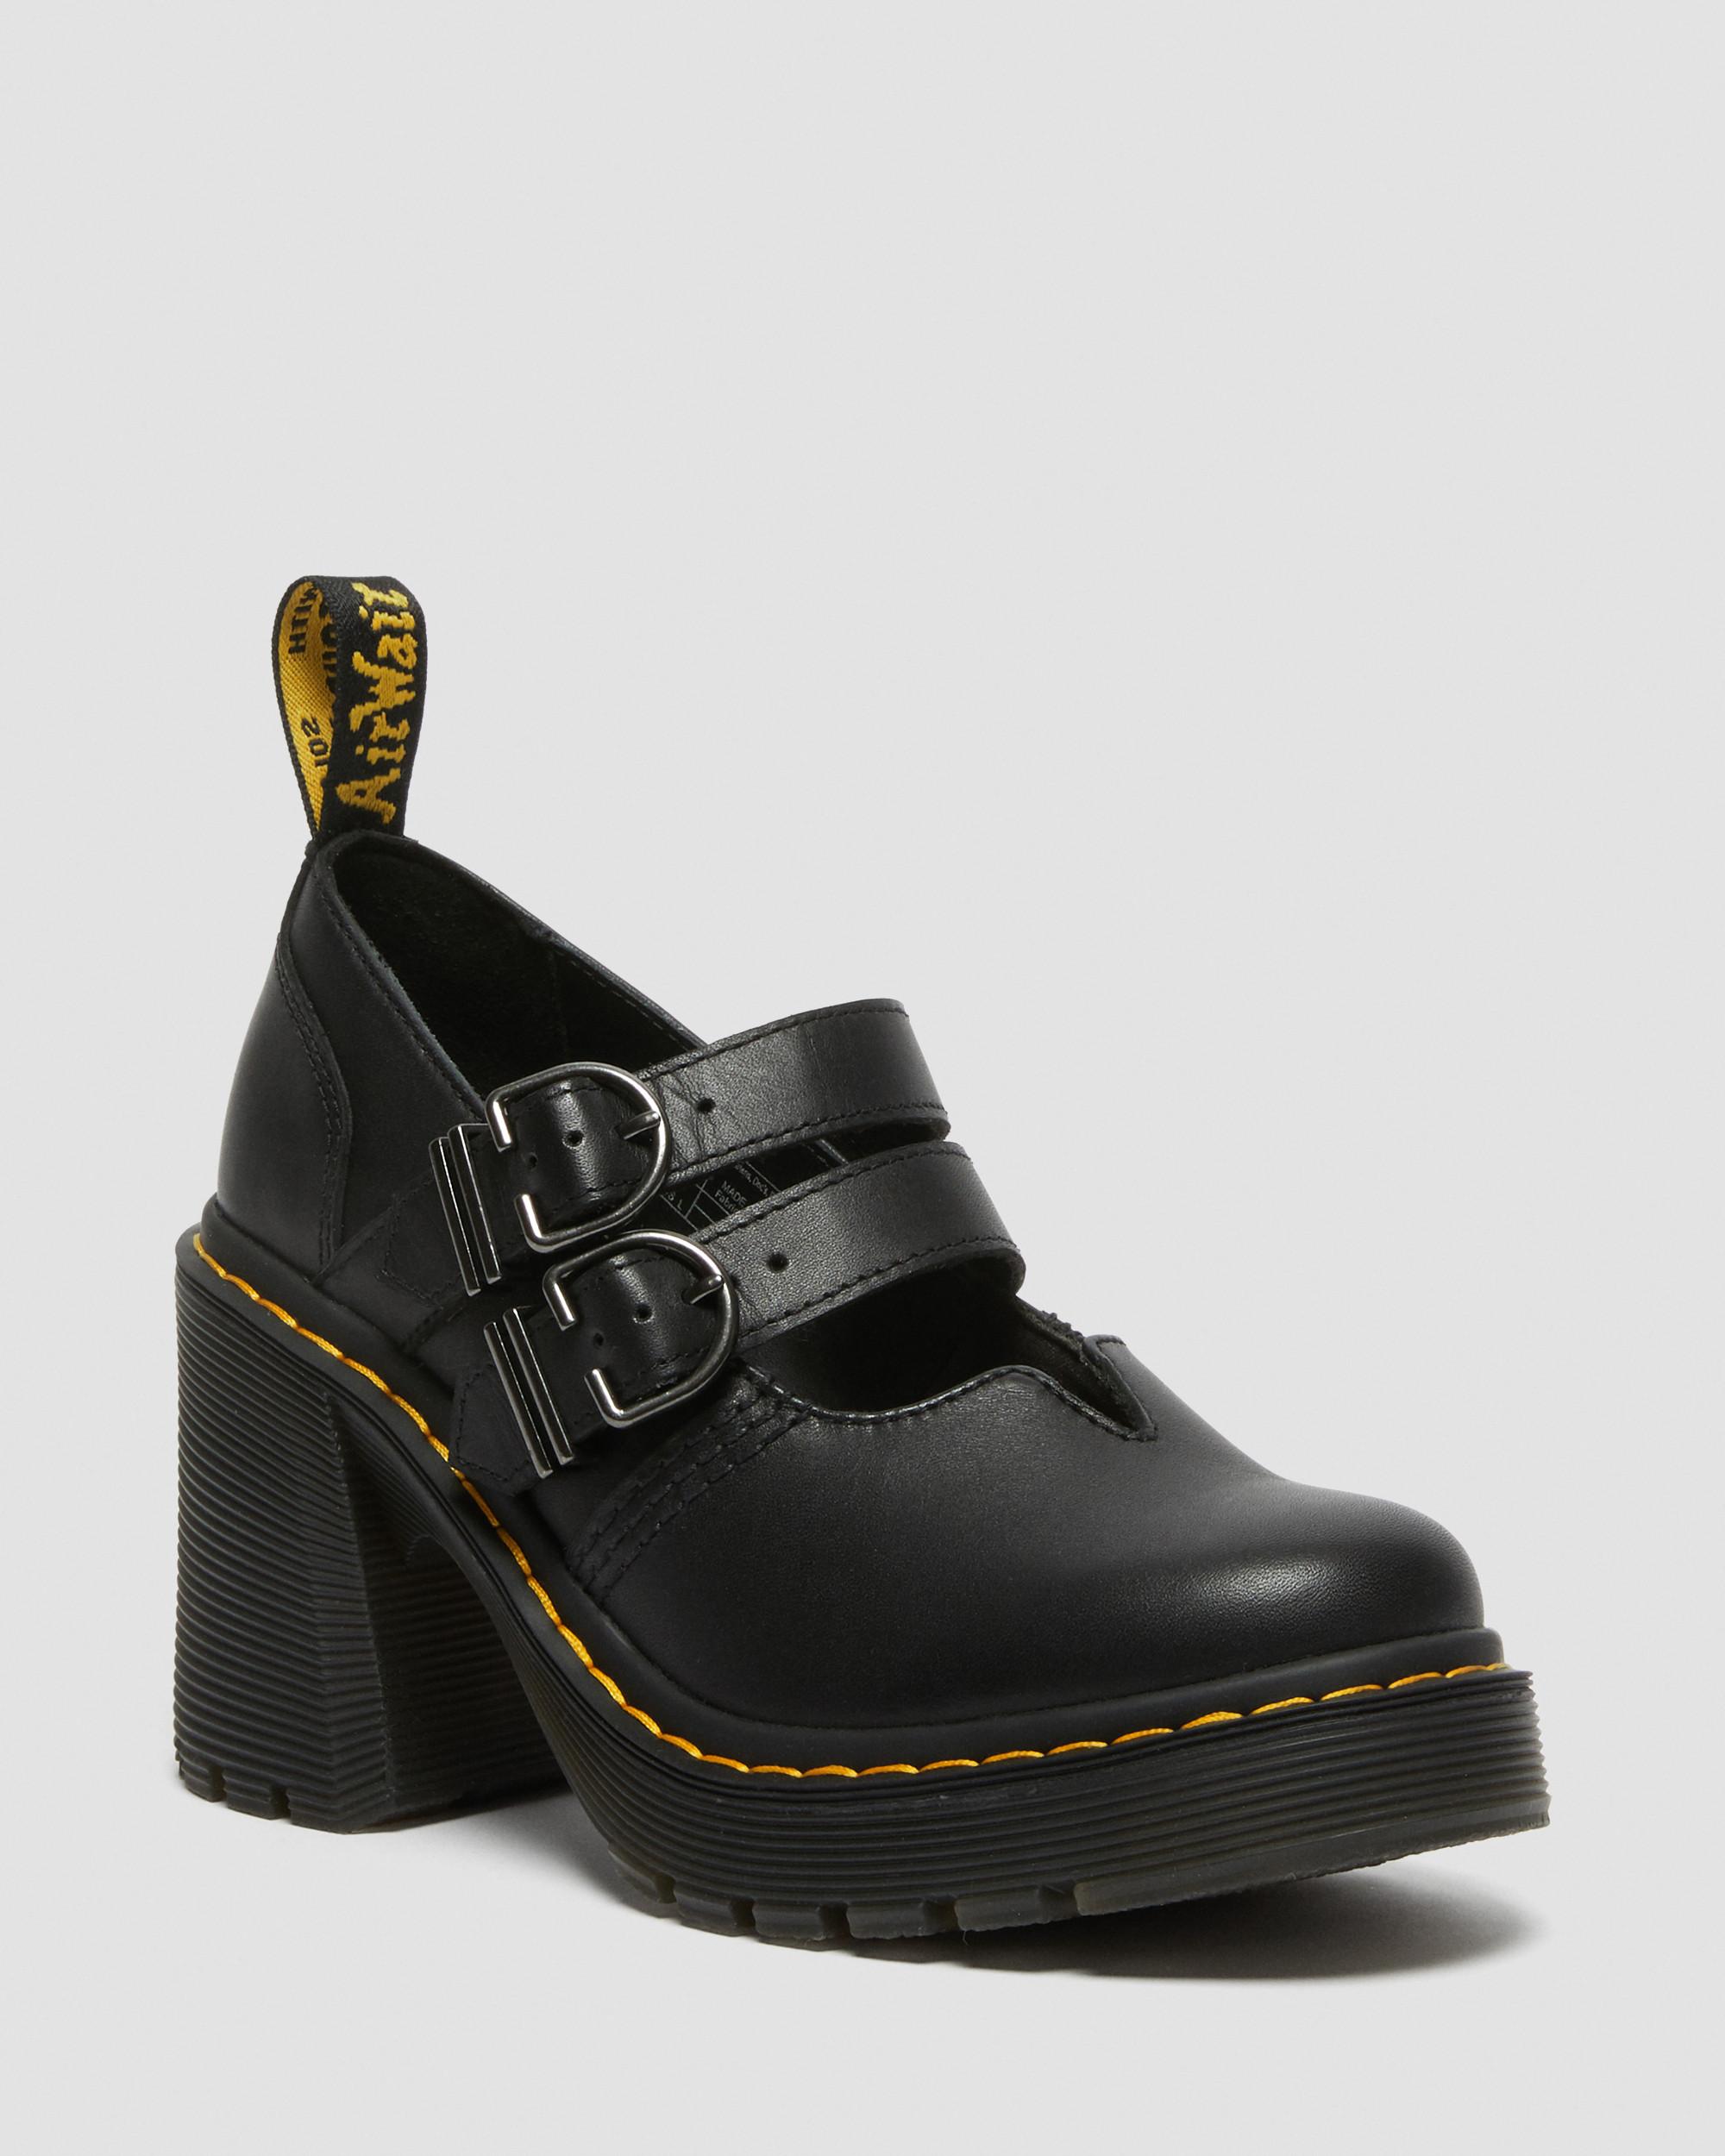 Eviee Sendal Leather Heeled Shoes, Black | Dr. Martens